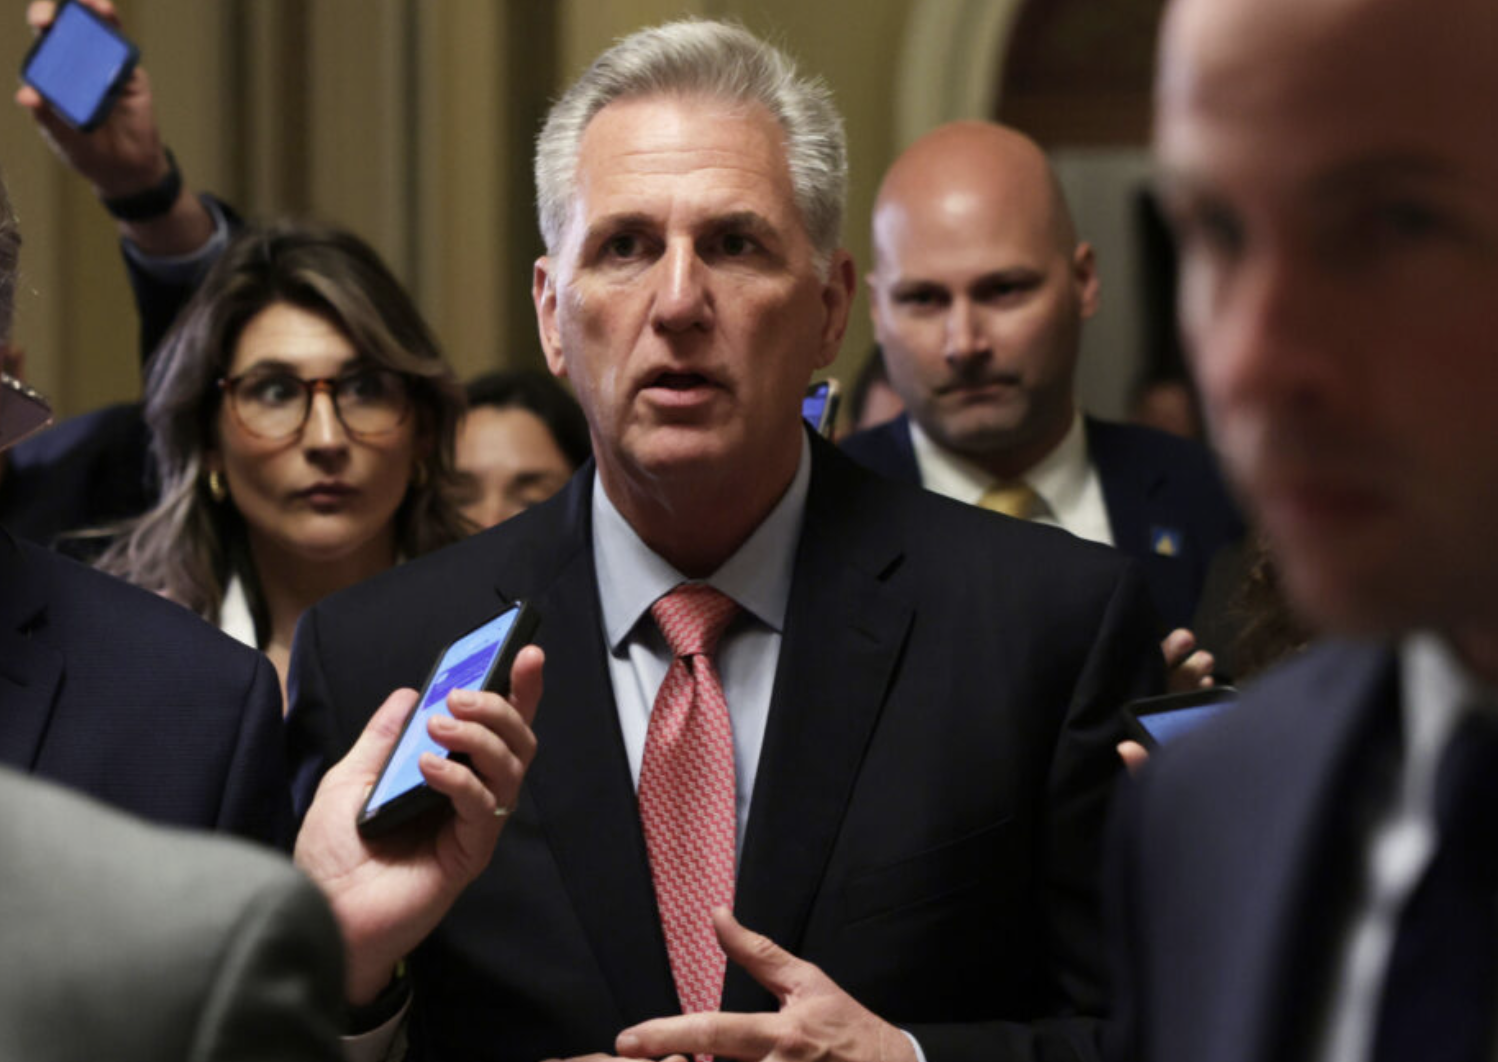 Kevin McCarthy, R-CA Speaker of the House and members of media